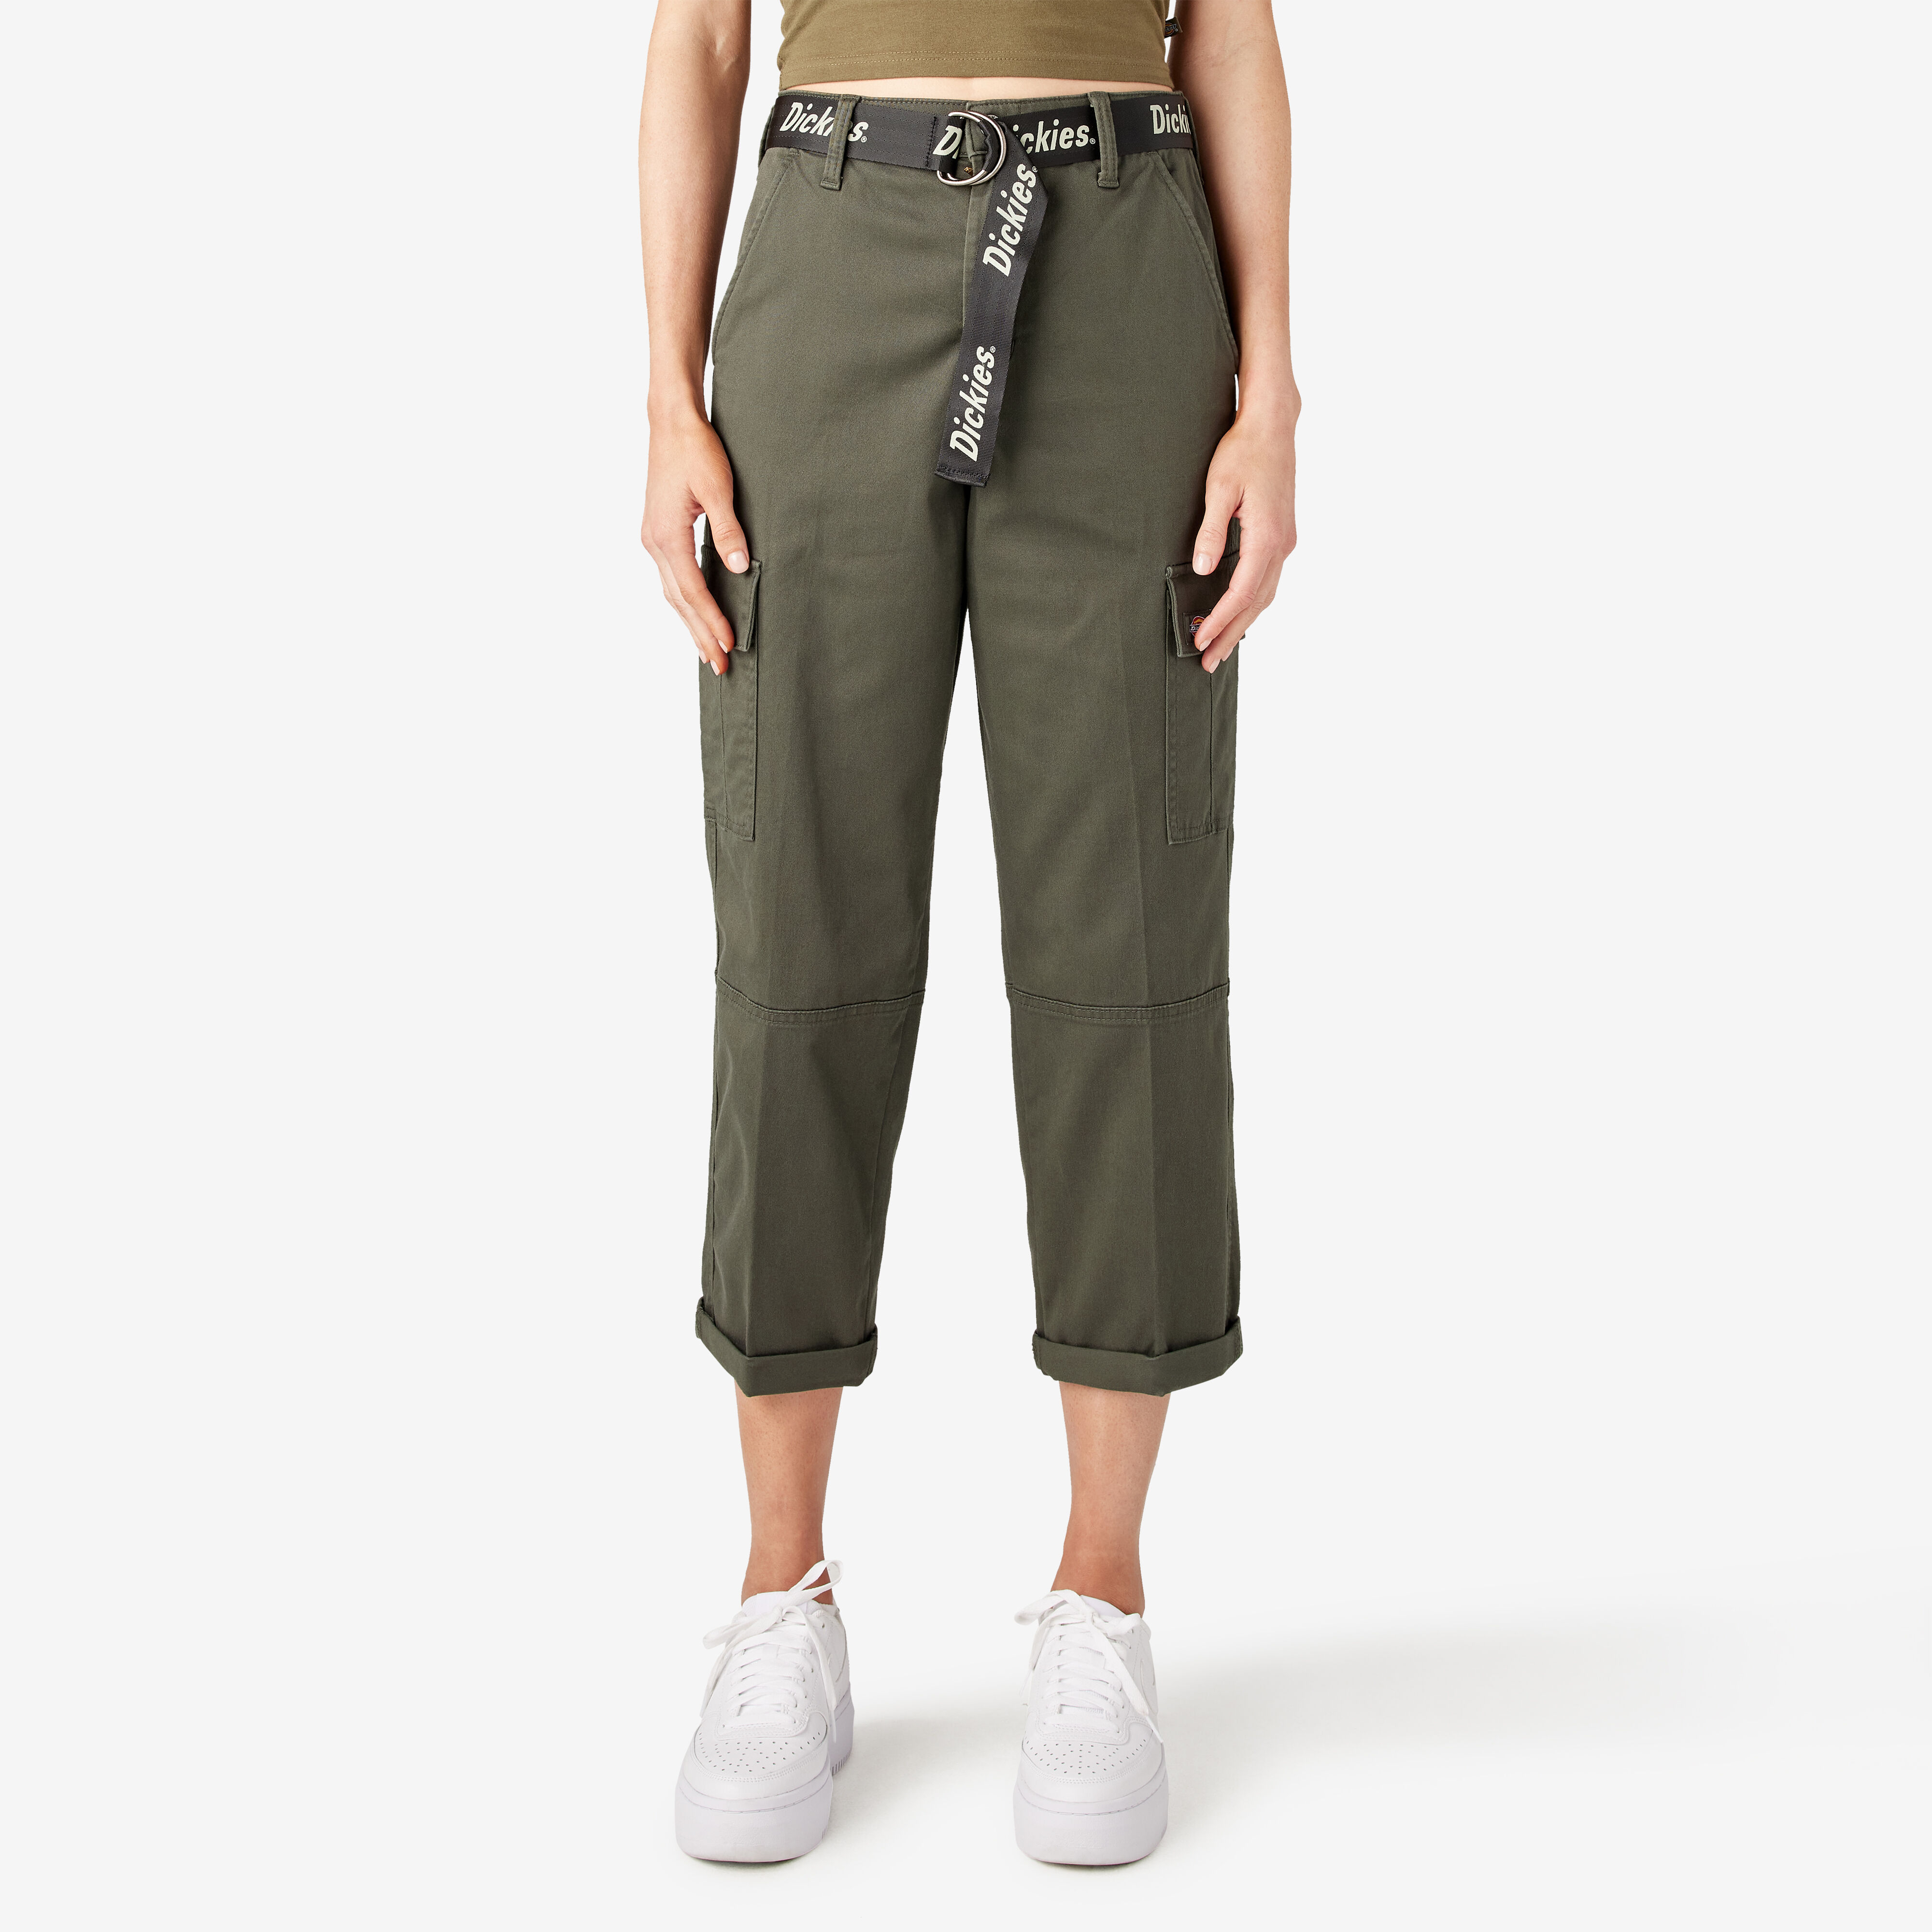 Womens Trousers Dickies Vancleve Work Pant in Grey Grey Slacks and Chinos Dickies Trousers Slacks and Chinos 